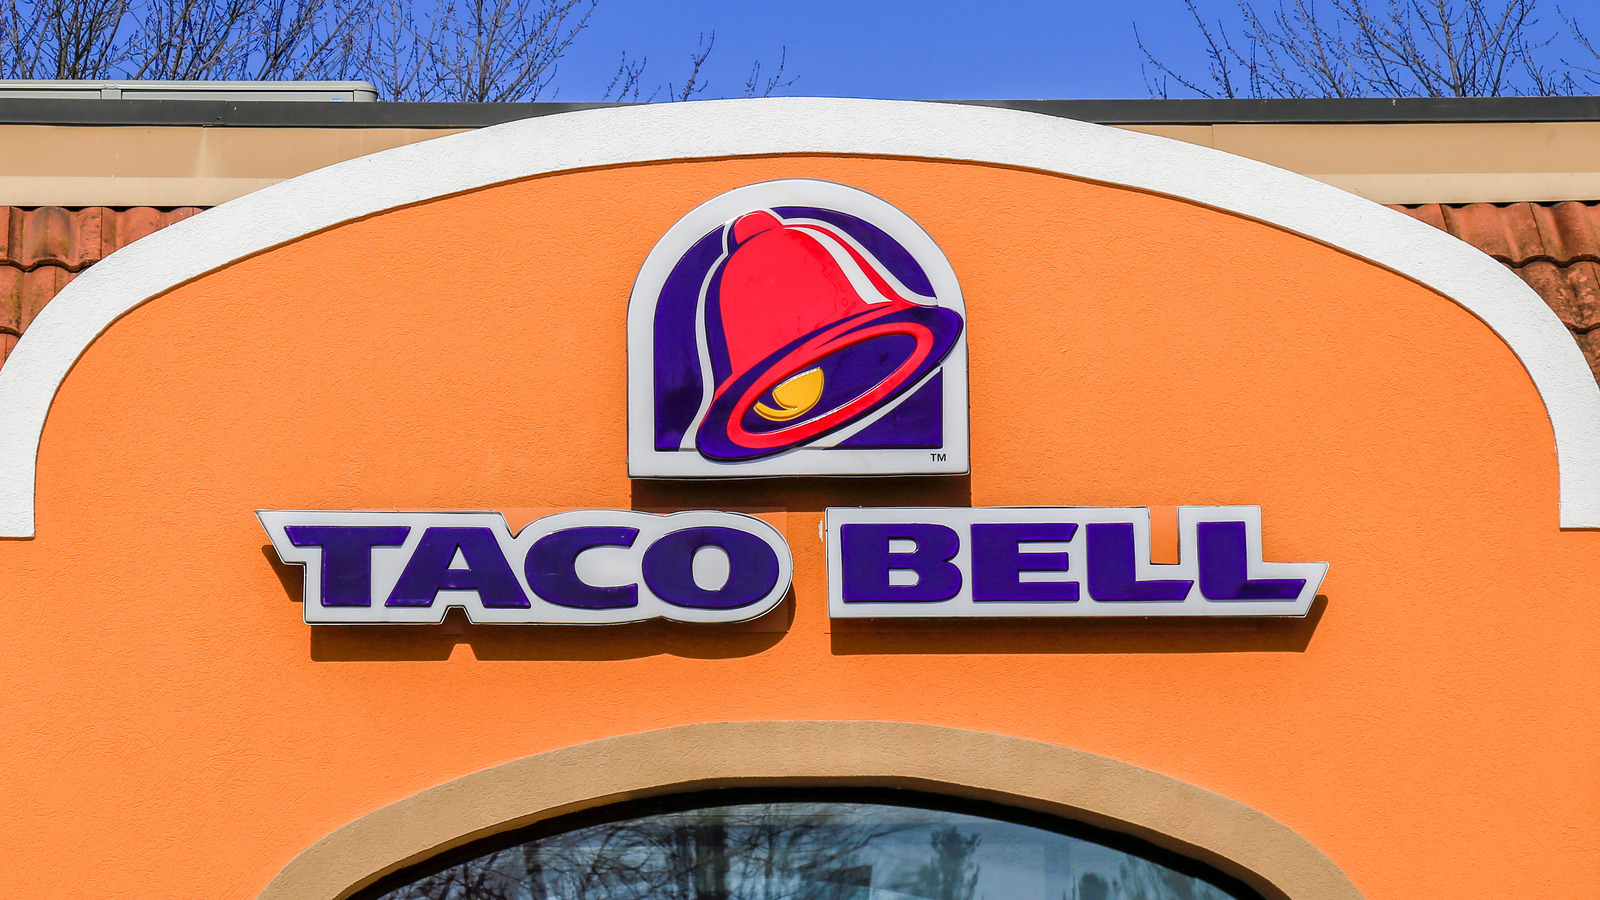 Taco Bell Outfits Employees with a 'Sense of Belonging' - QSR Magazine